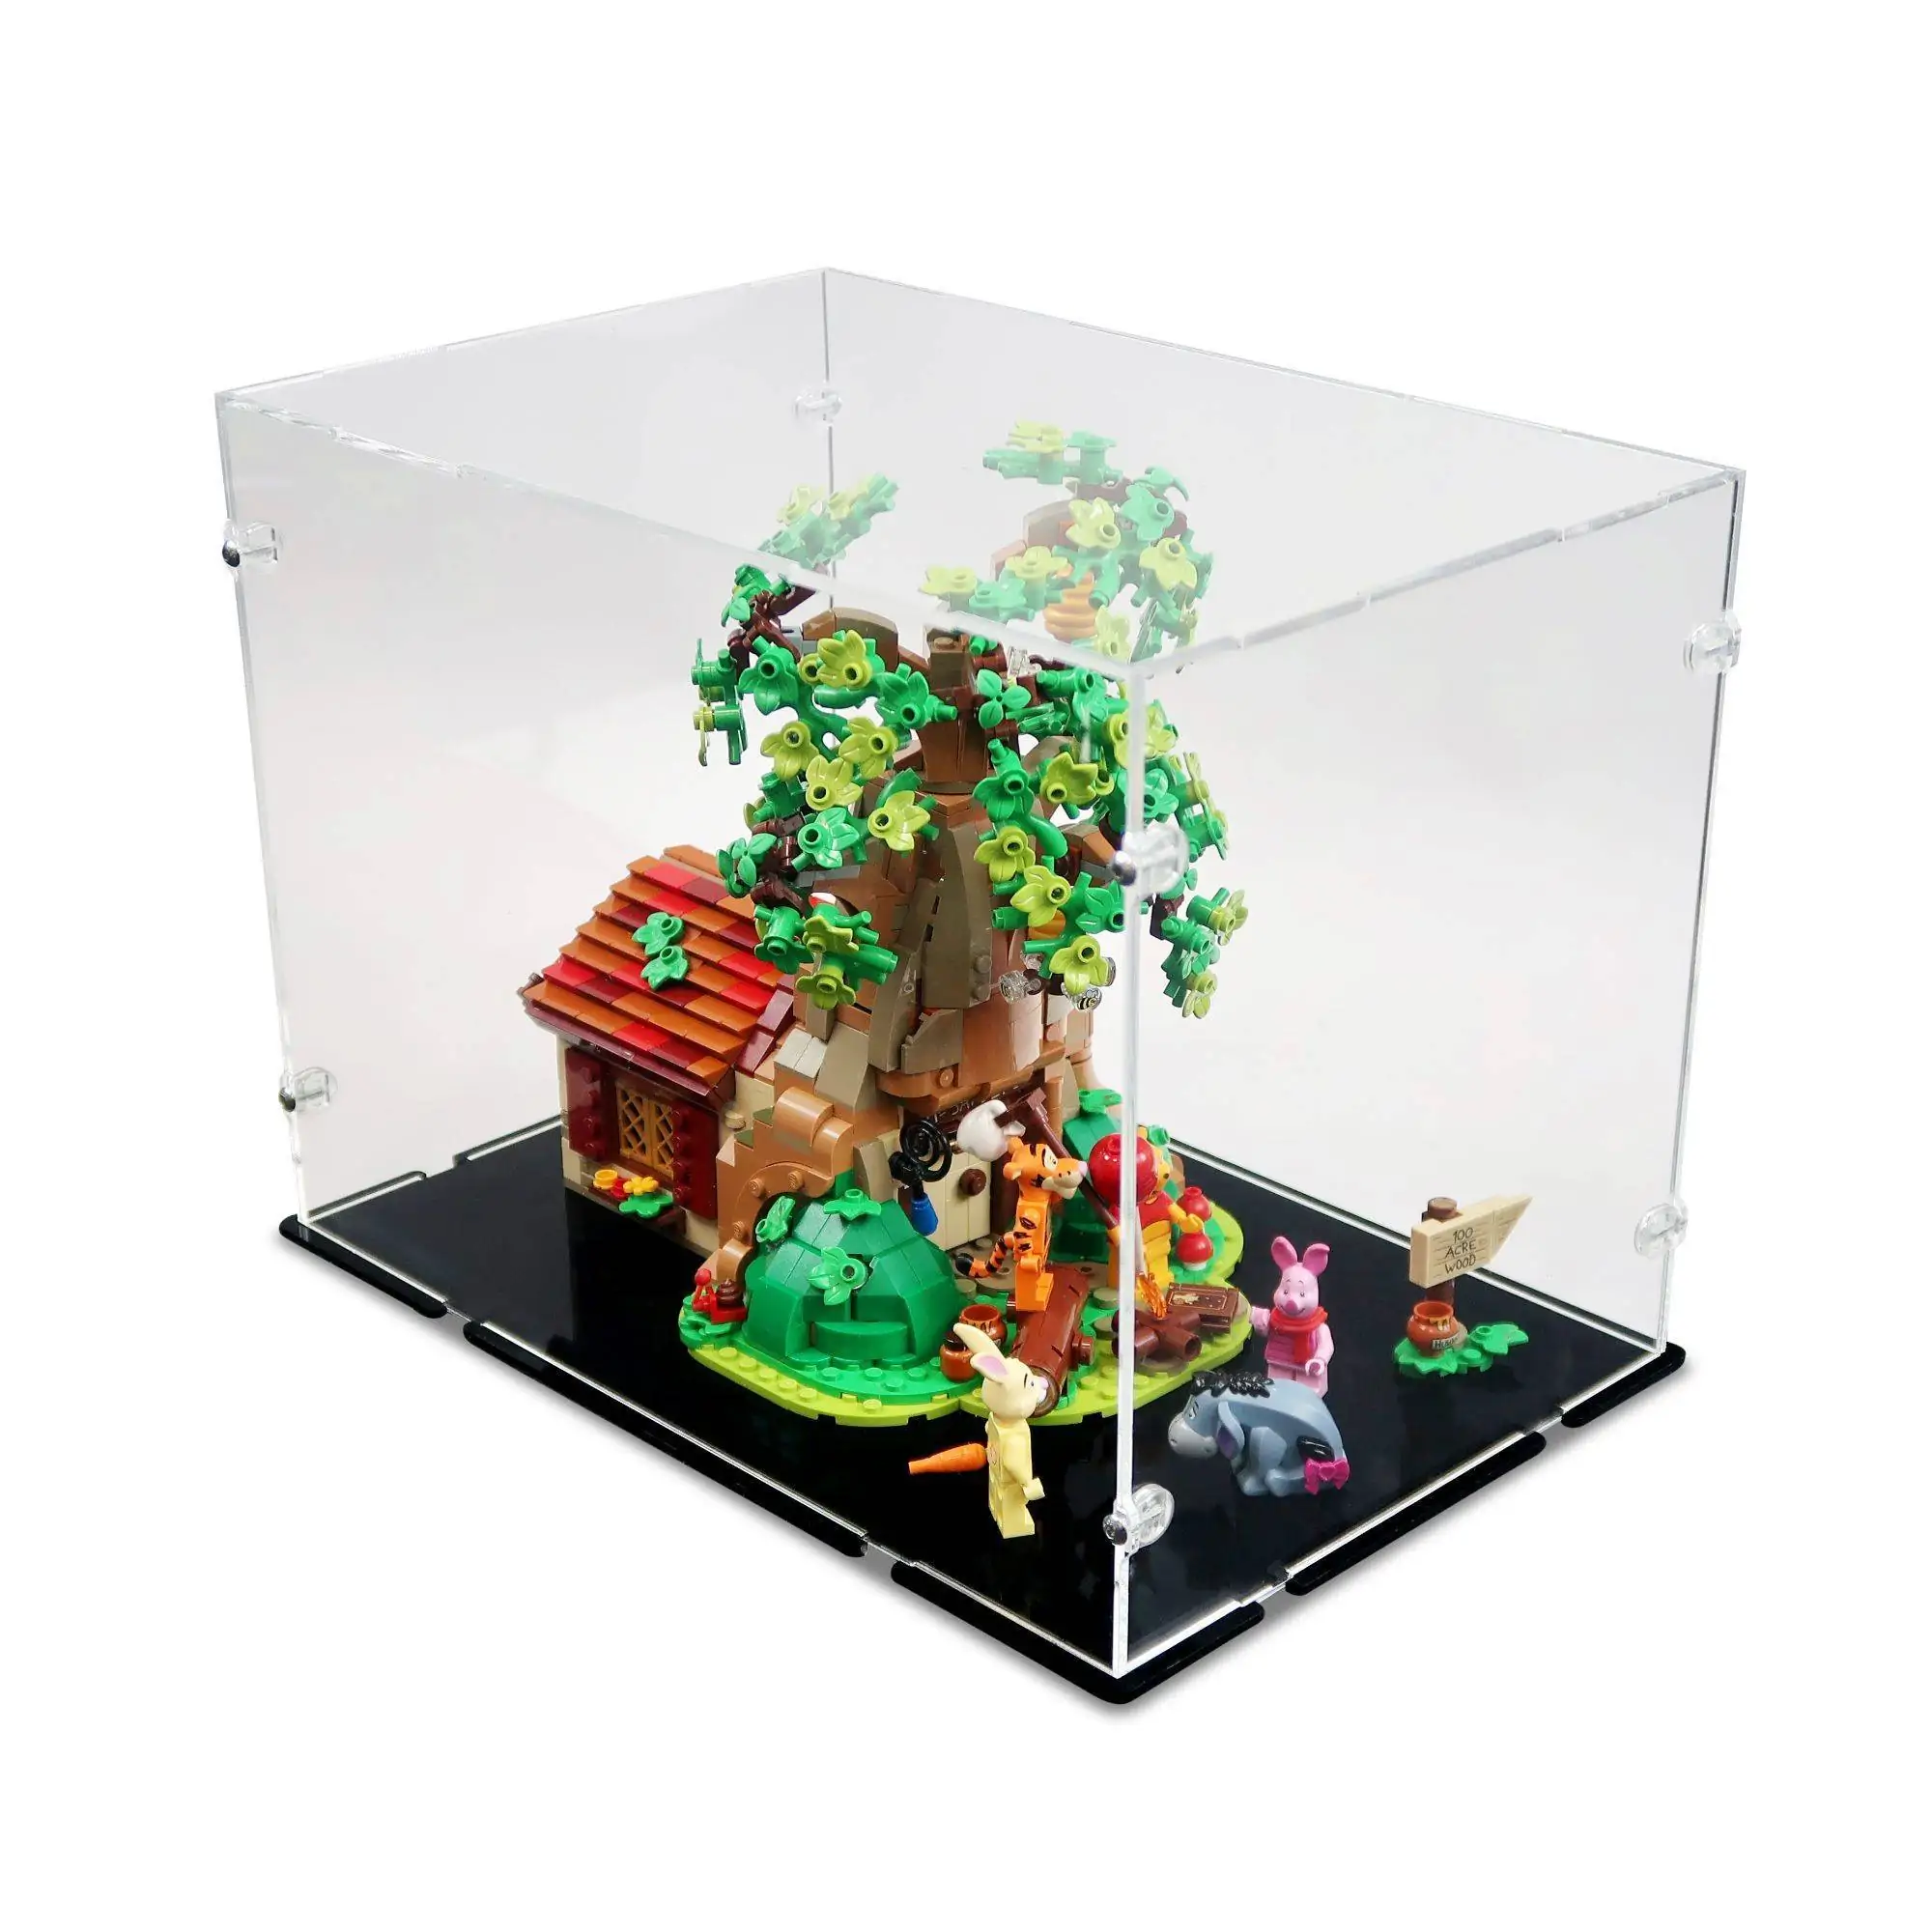 Deluxe Hardwood & Clear Acrylic Display Case for LEGO Friends